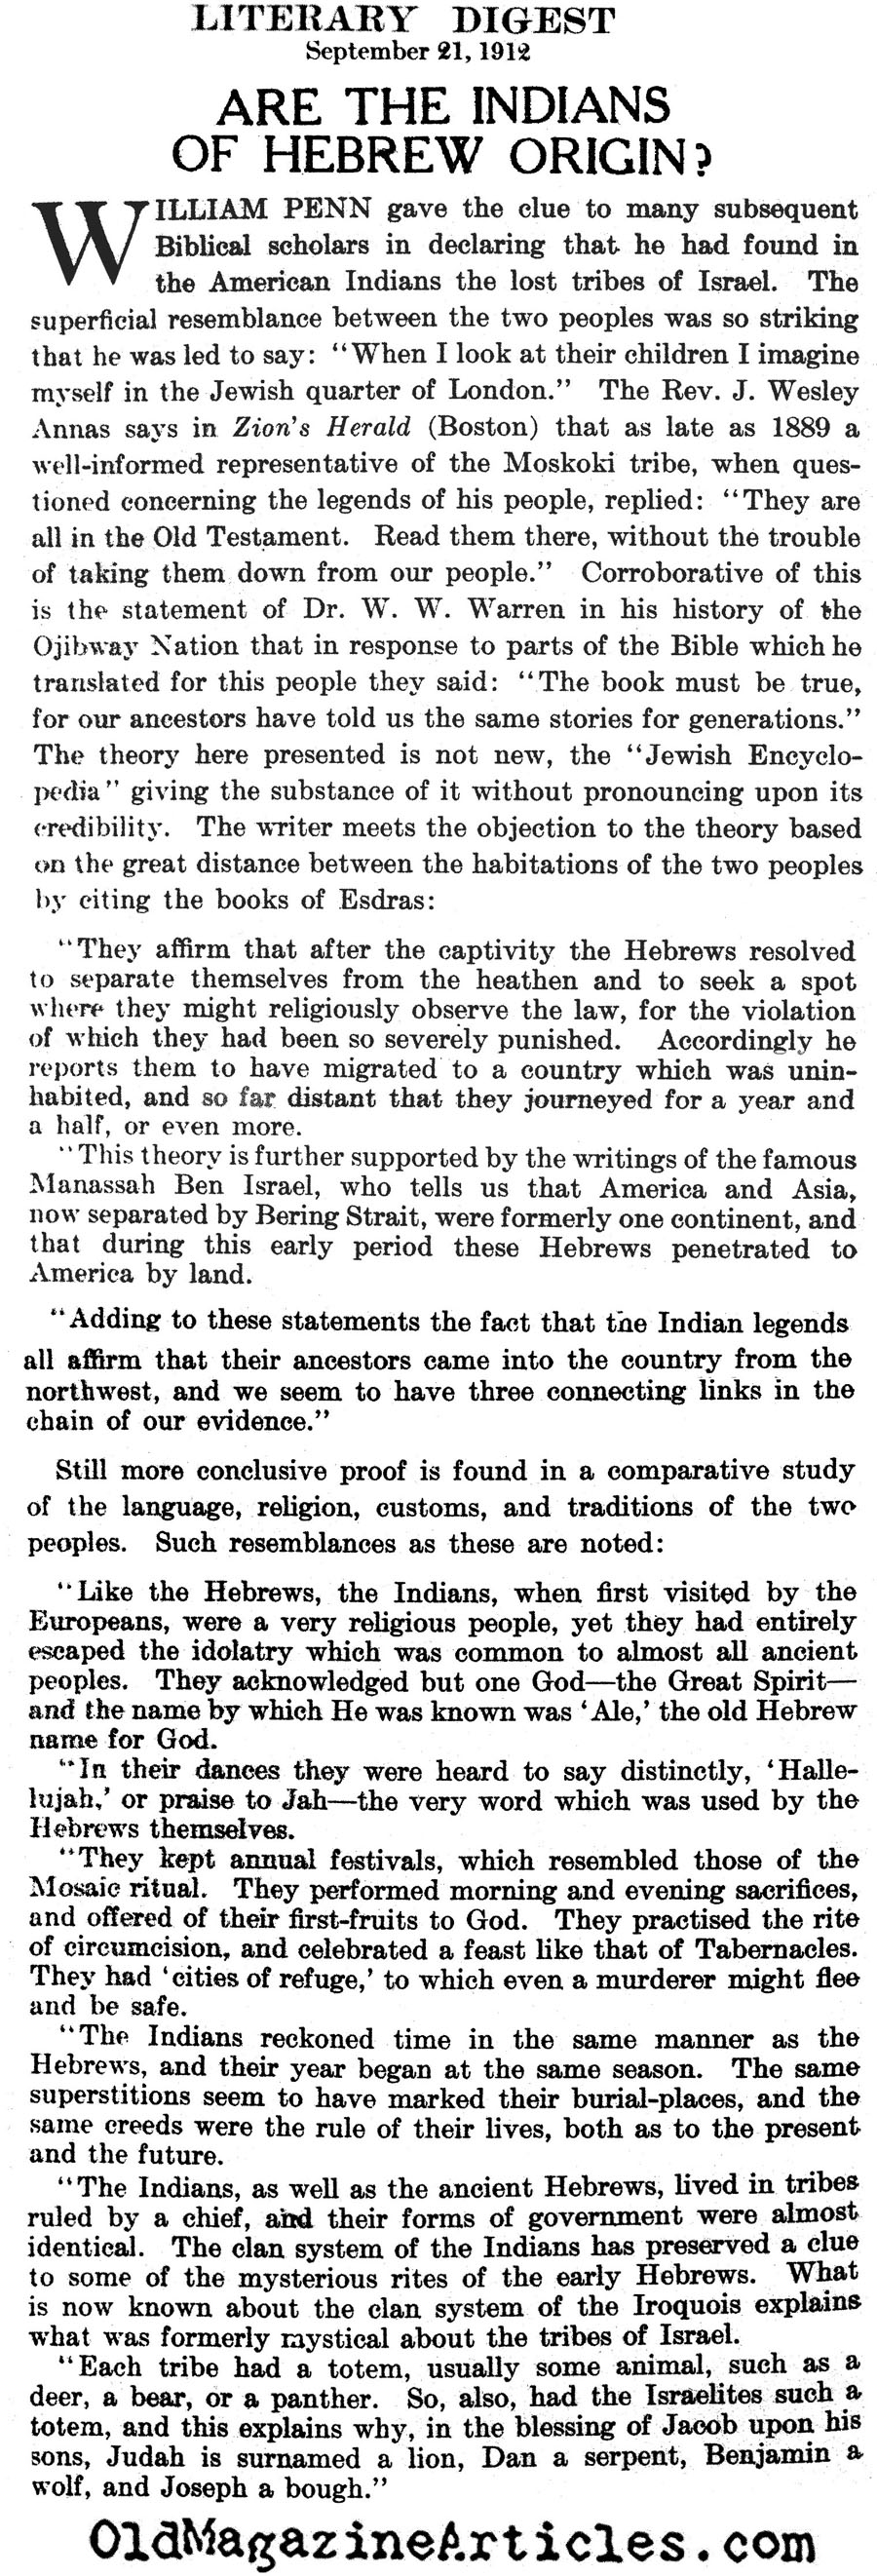 Are the Native Americans of Jewish Origin?  (The Literary Digest, 1912)